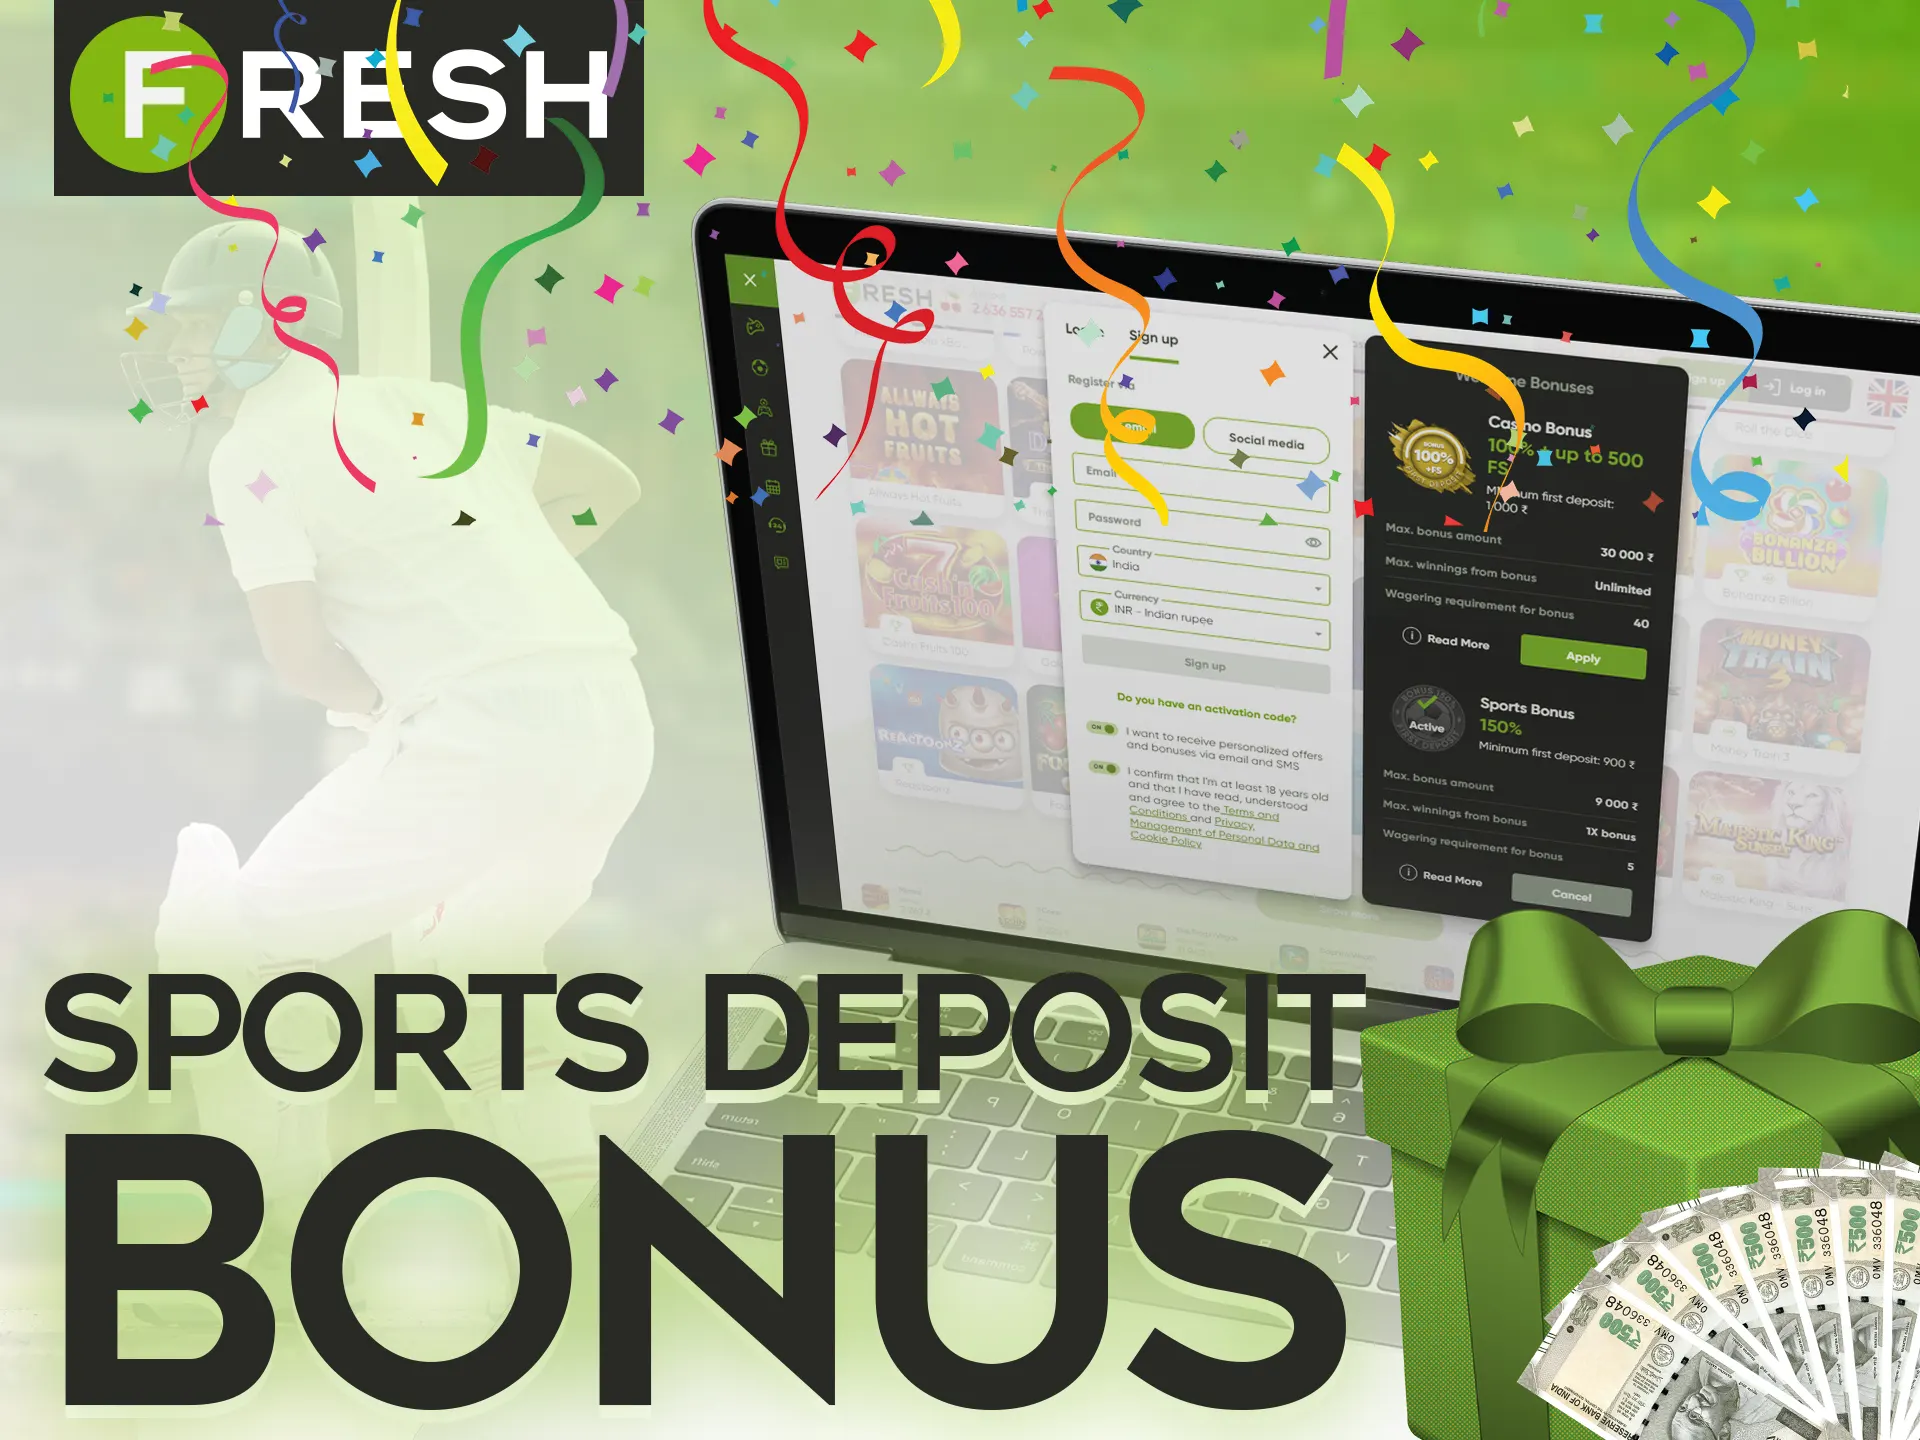 Get a sports bonus by making bets on sports at the Fresh Casino.